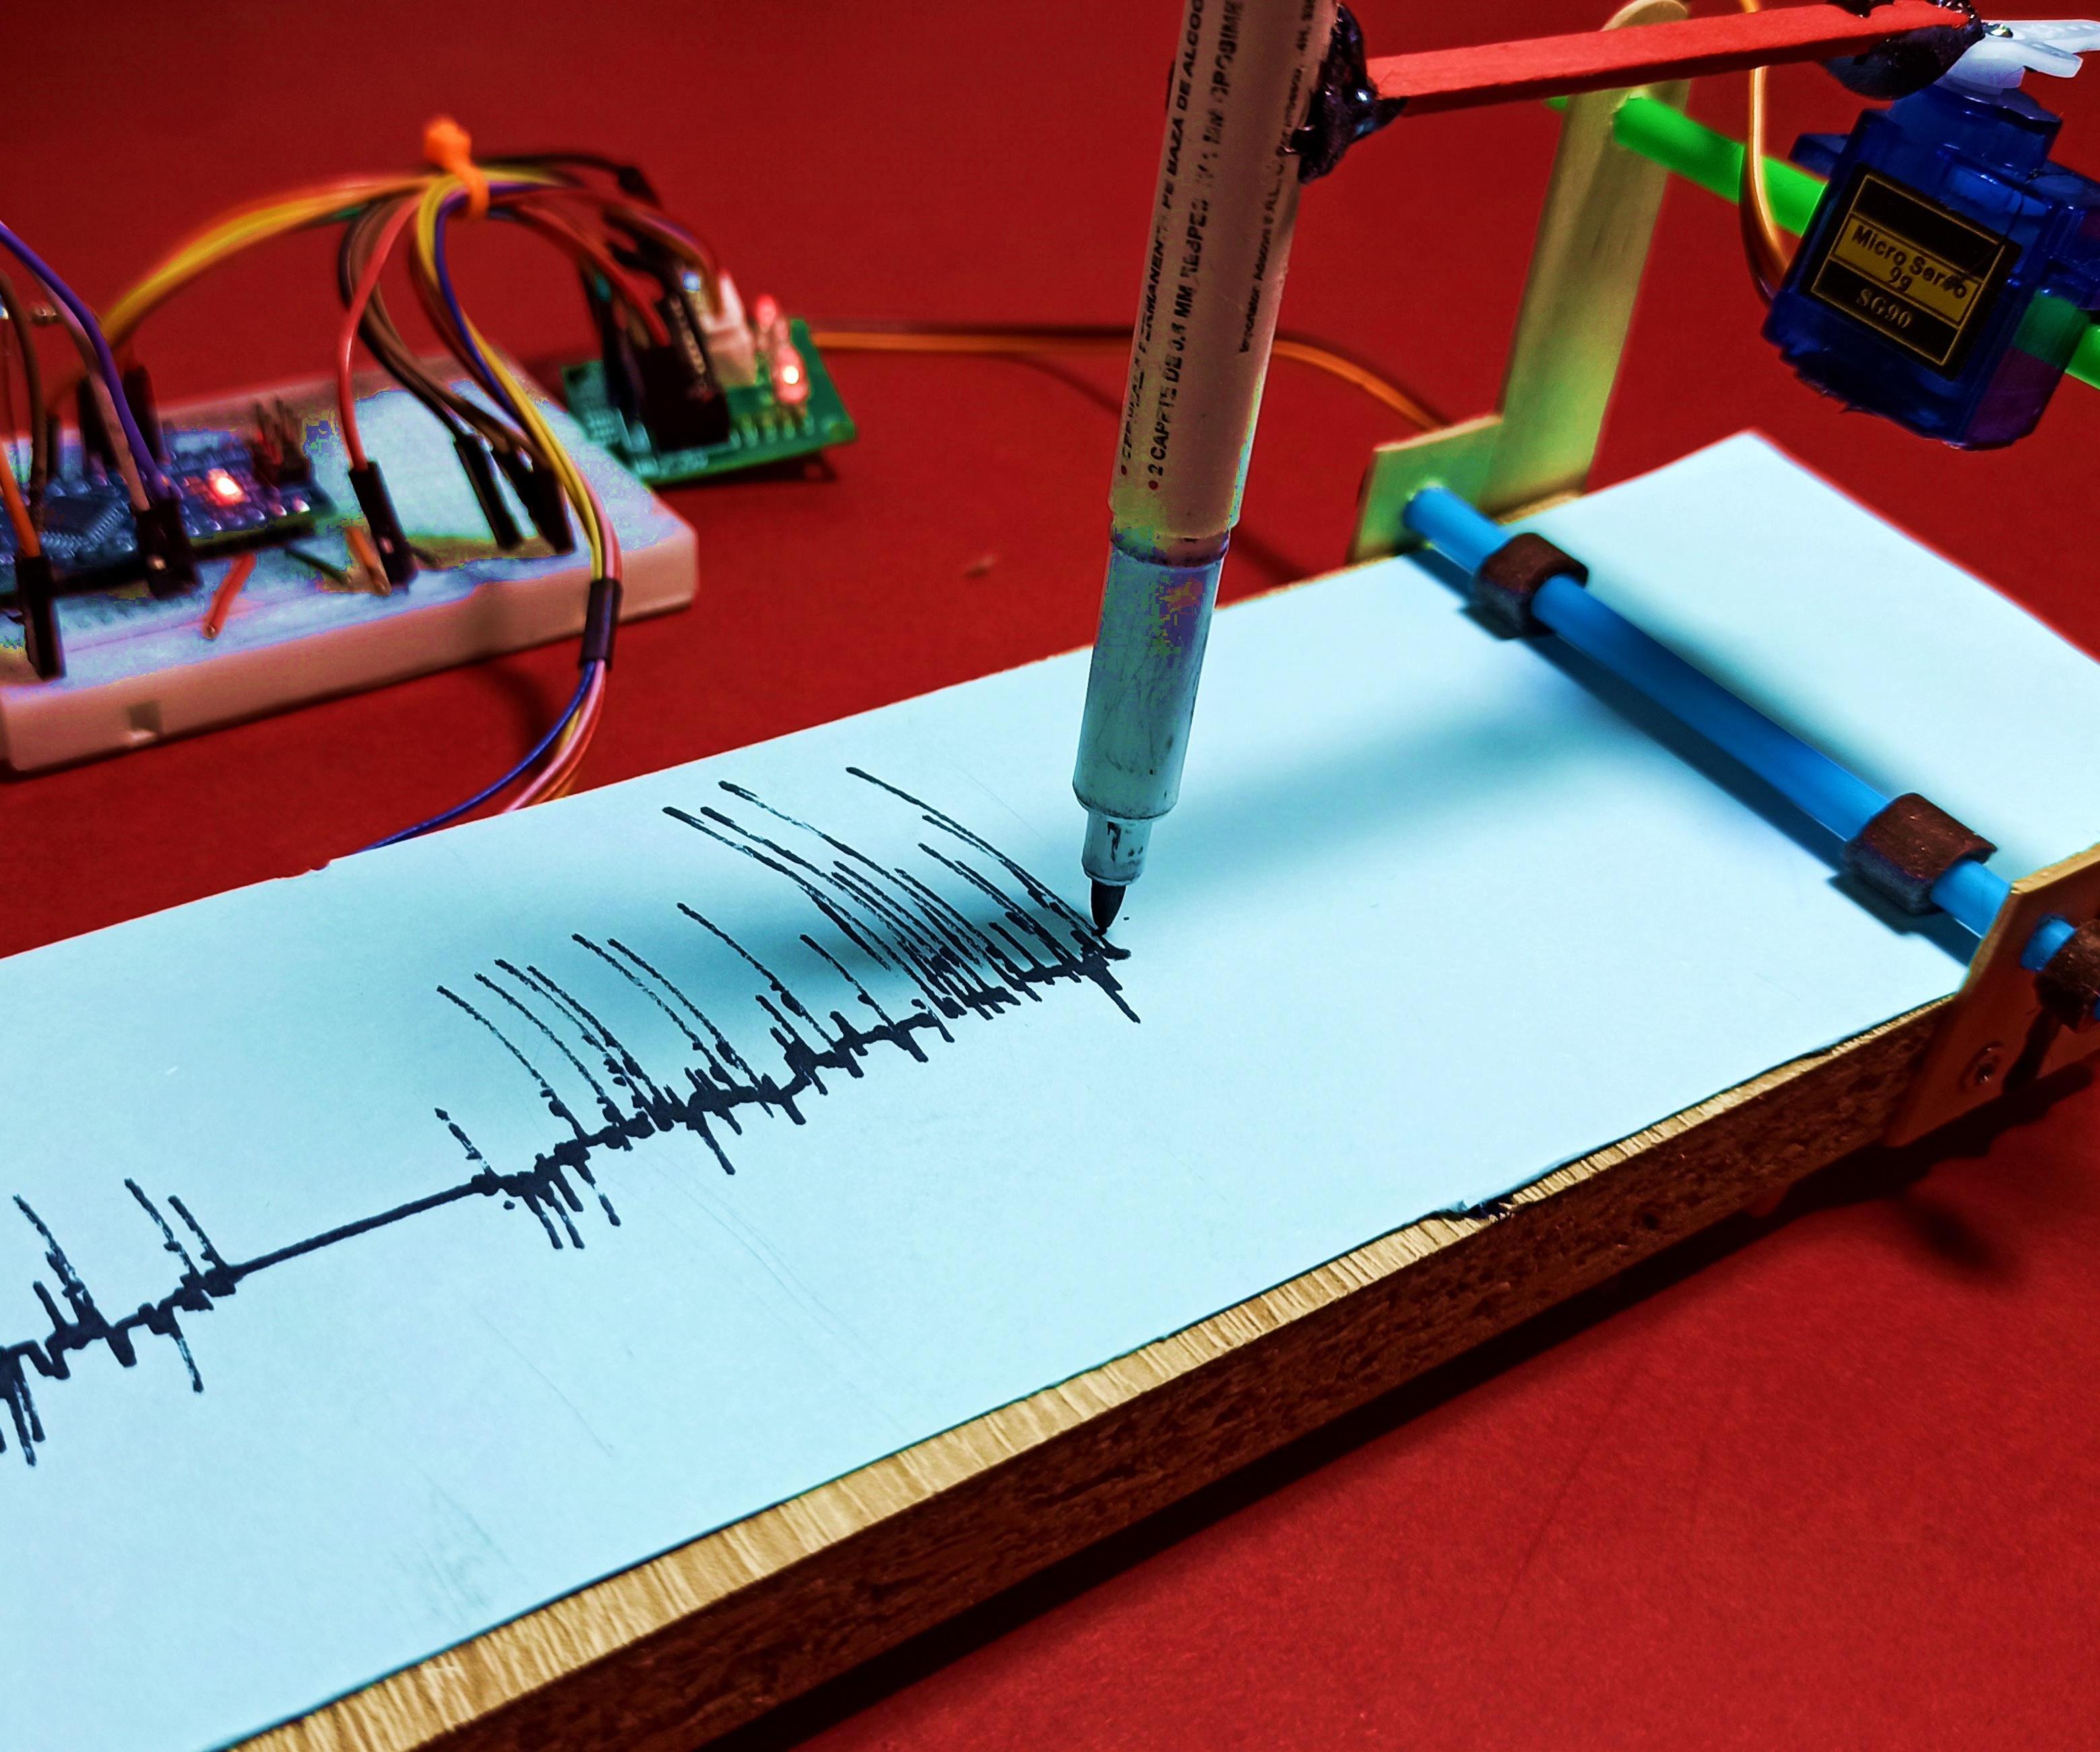 How to Make a Simple Seismograph